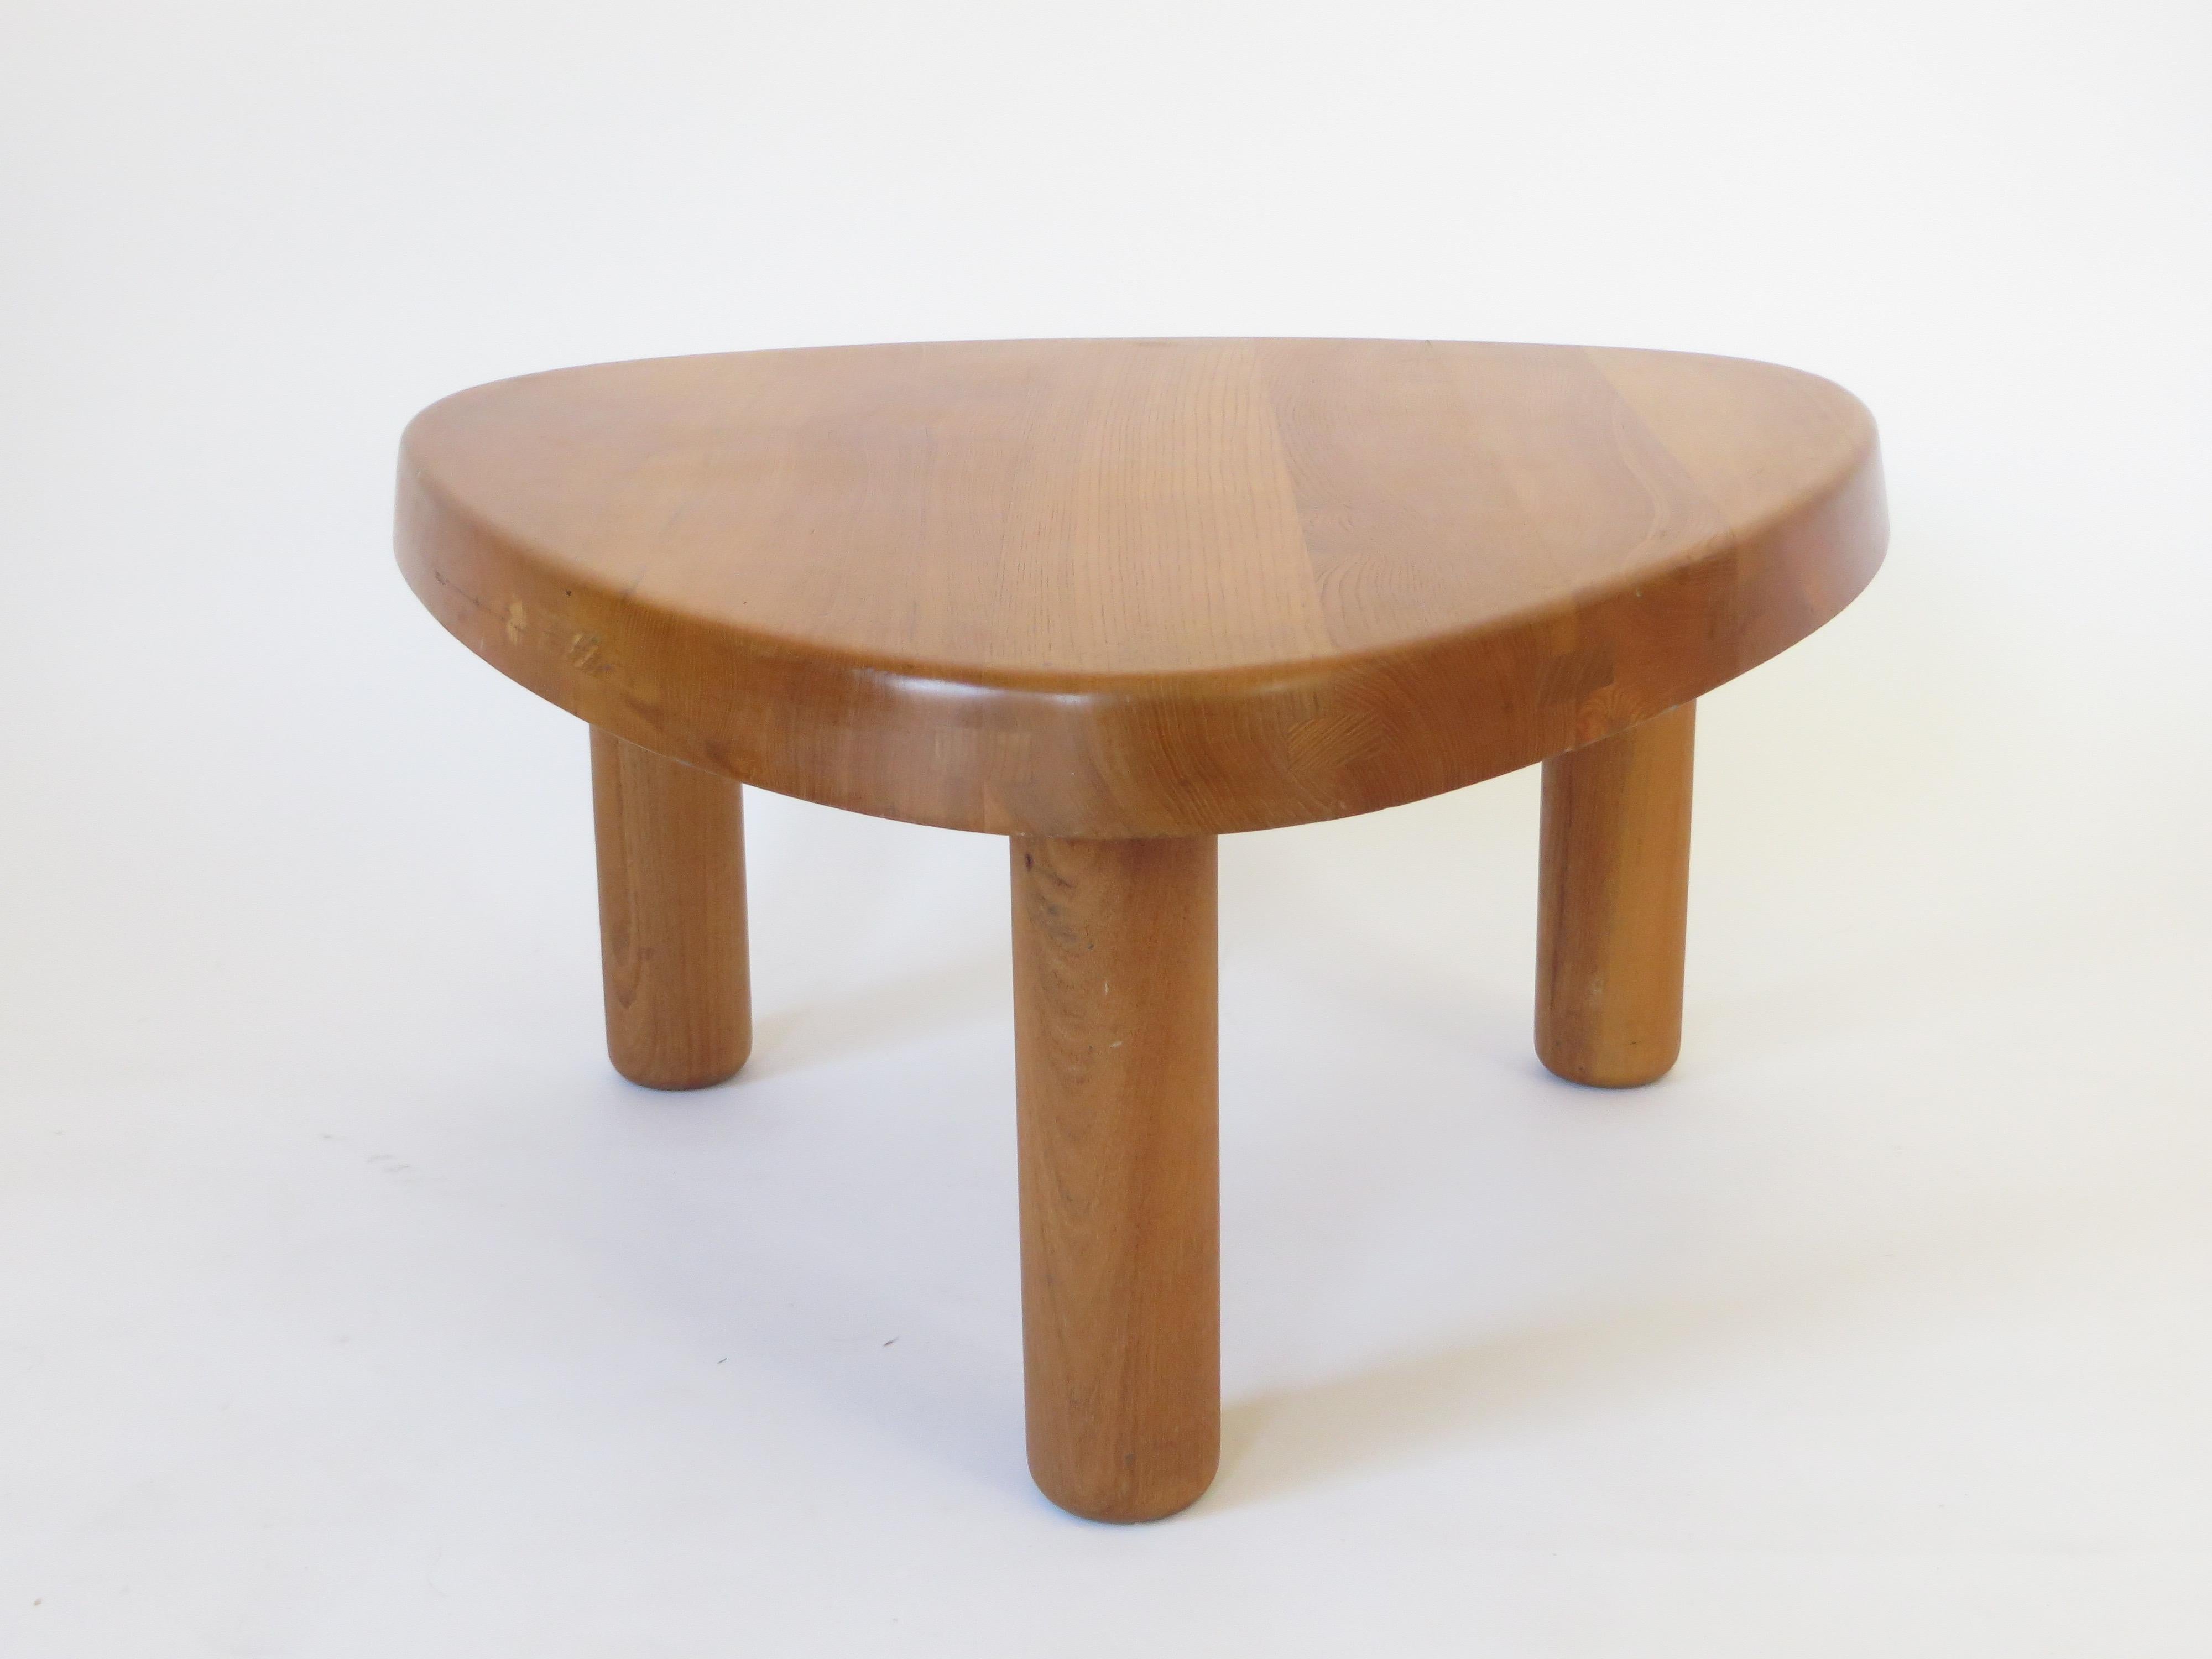 Pierre Chapo coffee table in elm wood, Model T23 circa 1960.
This is a fine vintage example, not the current production. 
The new production tables are stamped underneath with the date and Chapo trademark saying Meubles Chapo Gordes. 
Excellent